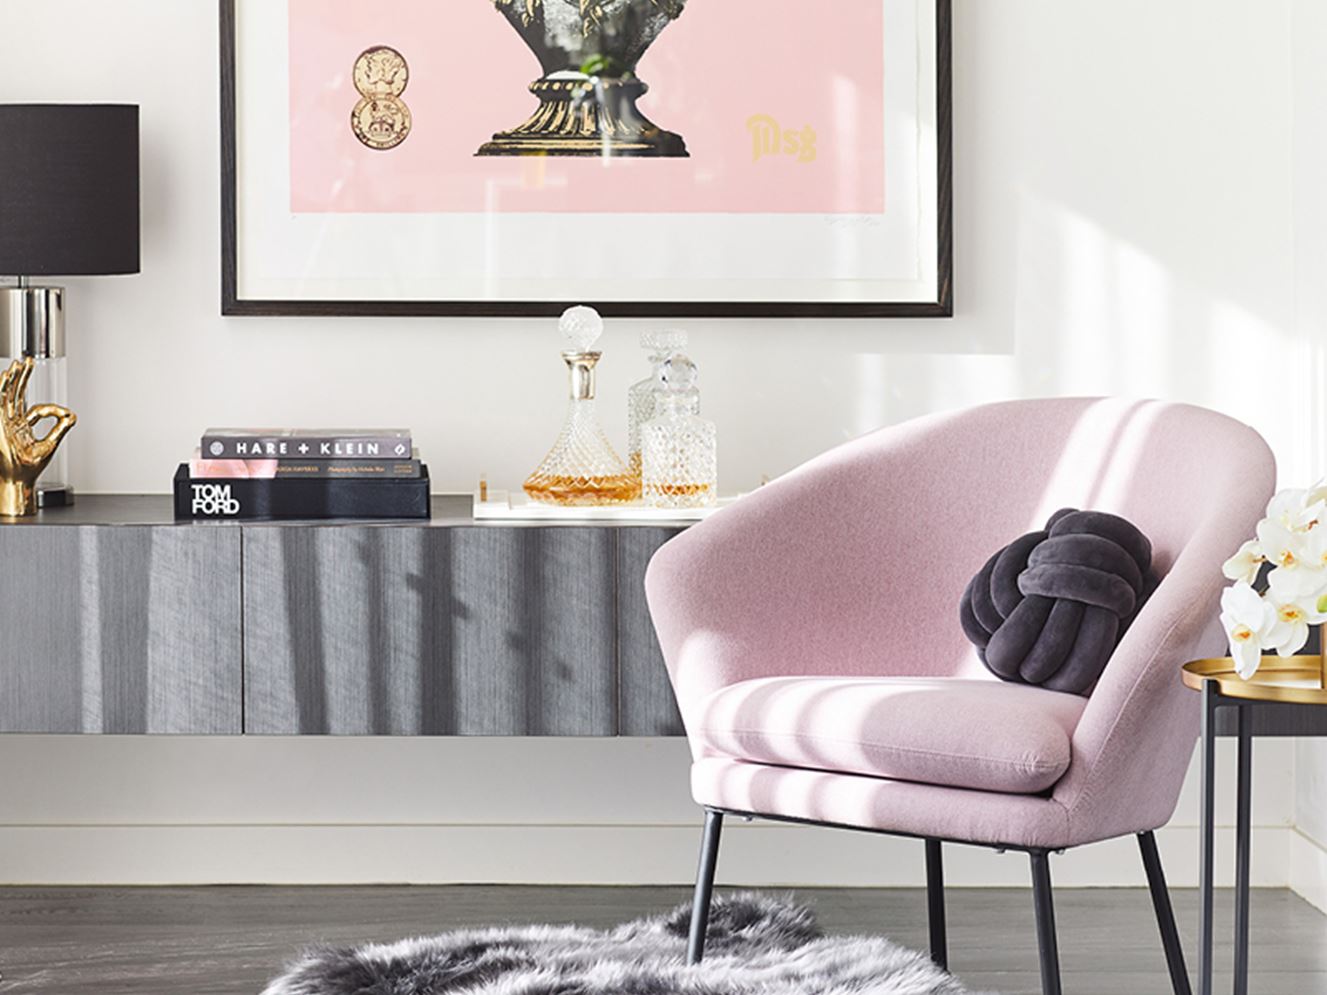 Bedroom corner styled with a pink armchair, and velvet navy blue knotted round cushion.